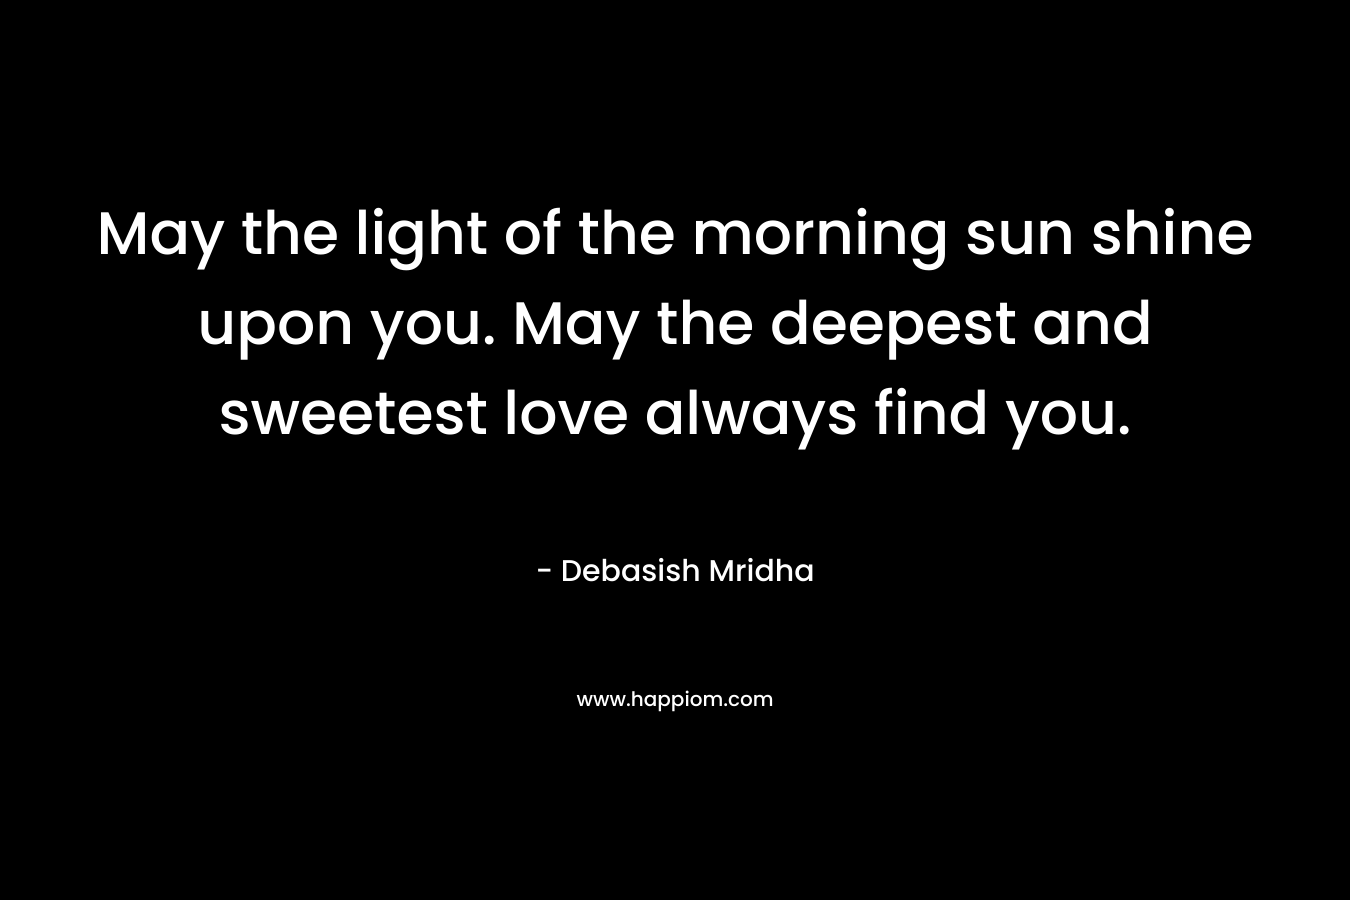 May the light of the morning sun shine upon you. May the deepest and sweetest love always find you. – Debasish Mridha